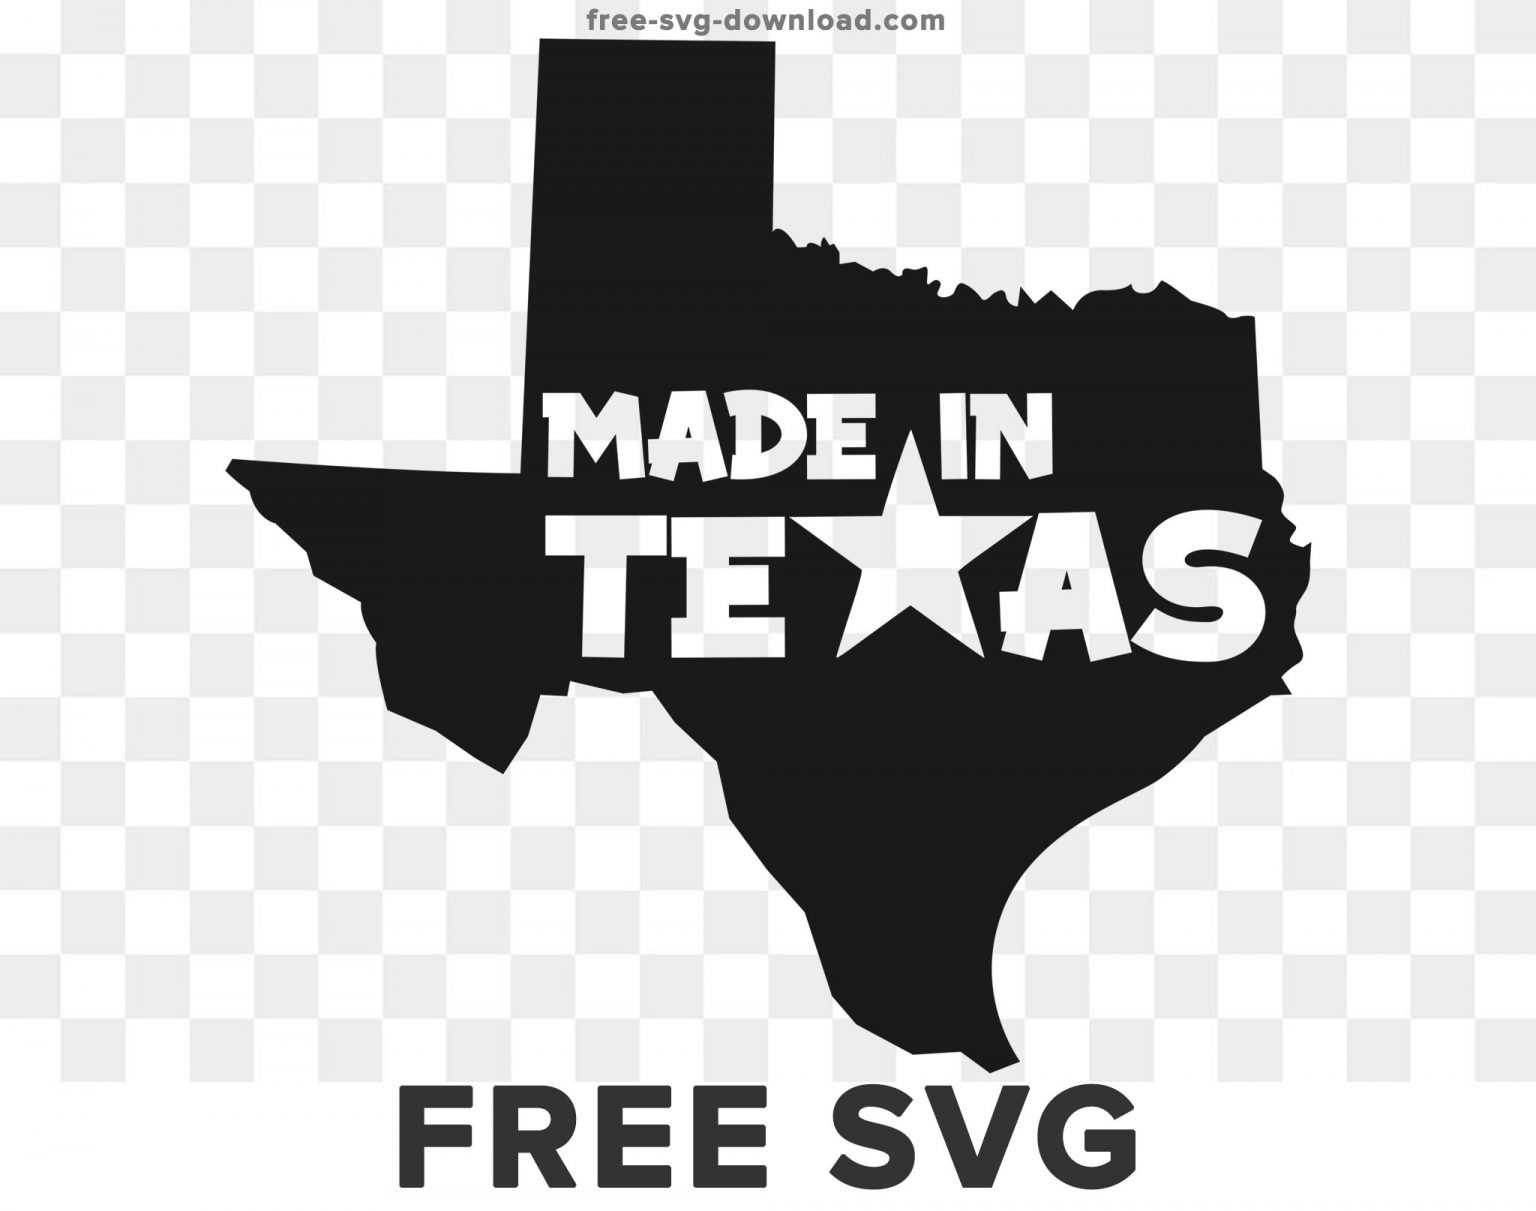 Made in Texas logo Svg | Free SVG Download